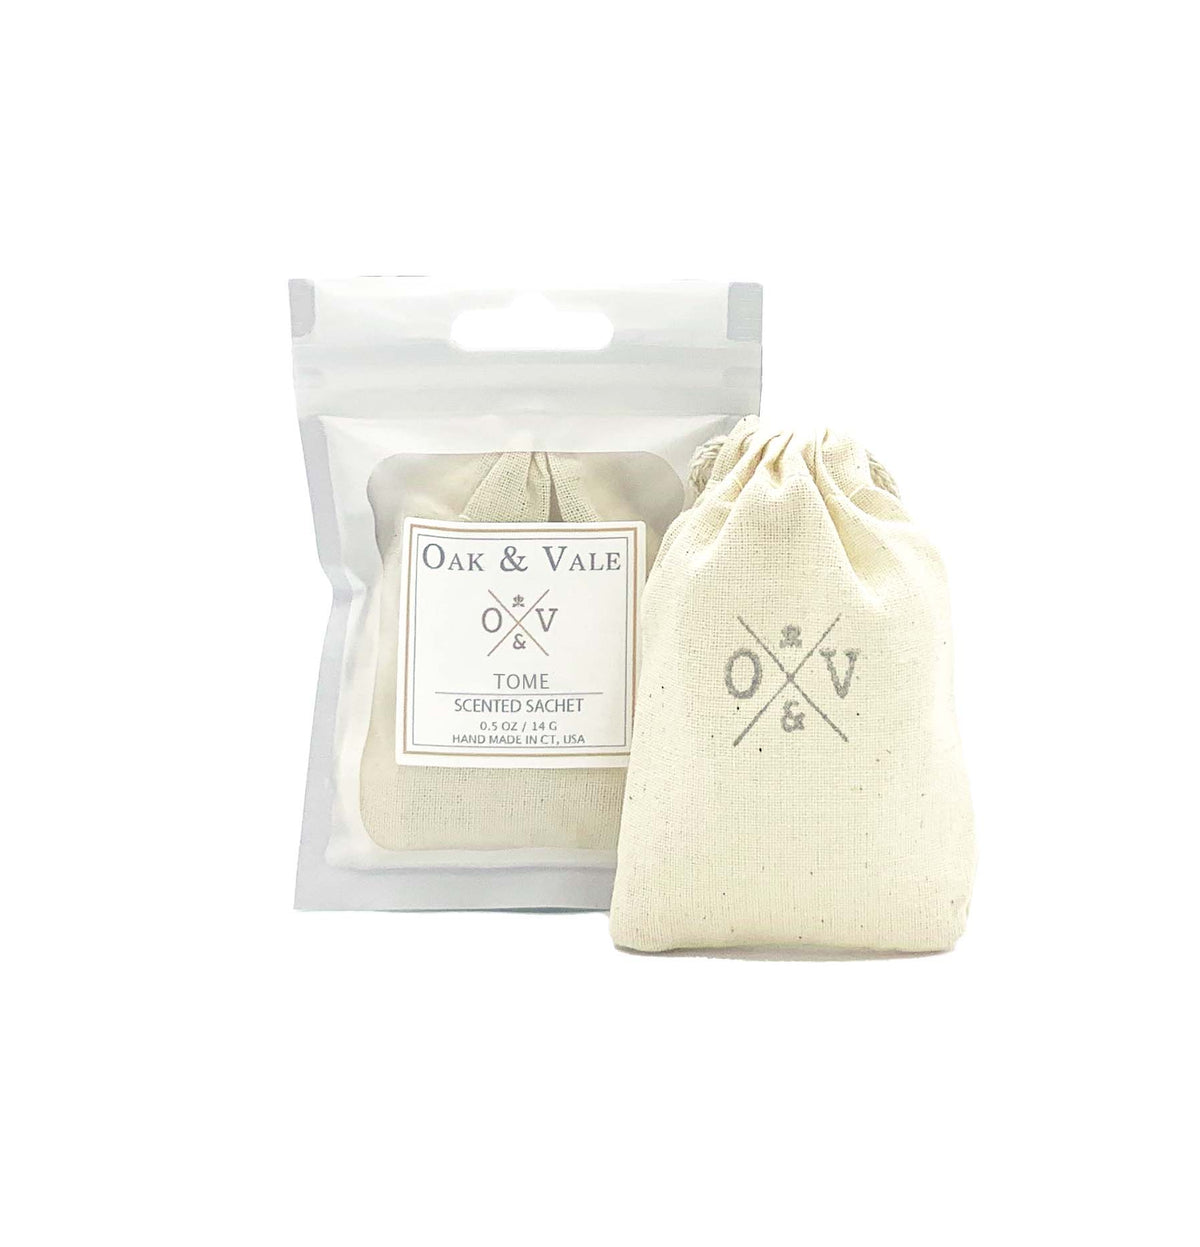 TOME SCENTED SACHET